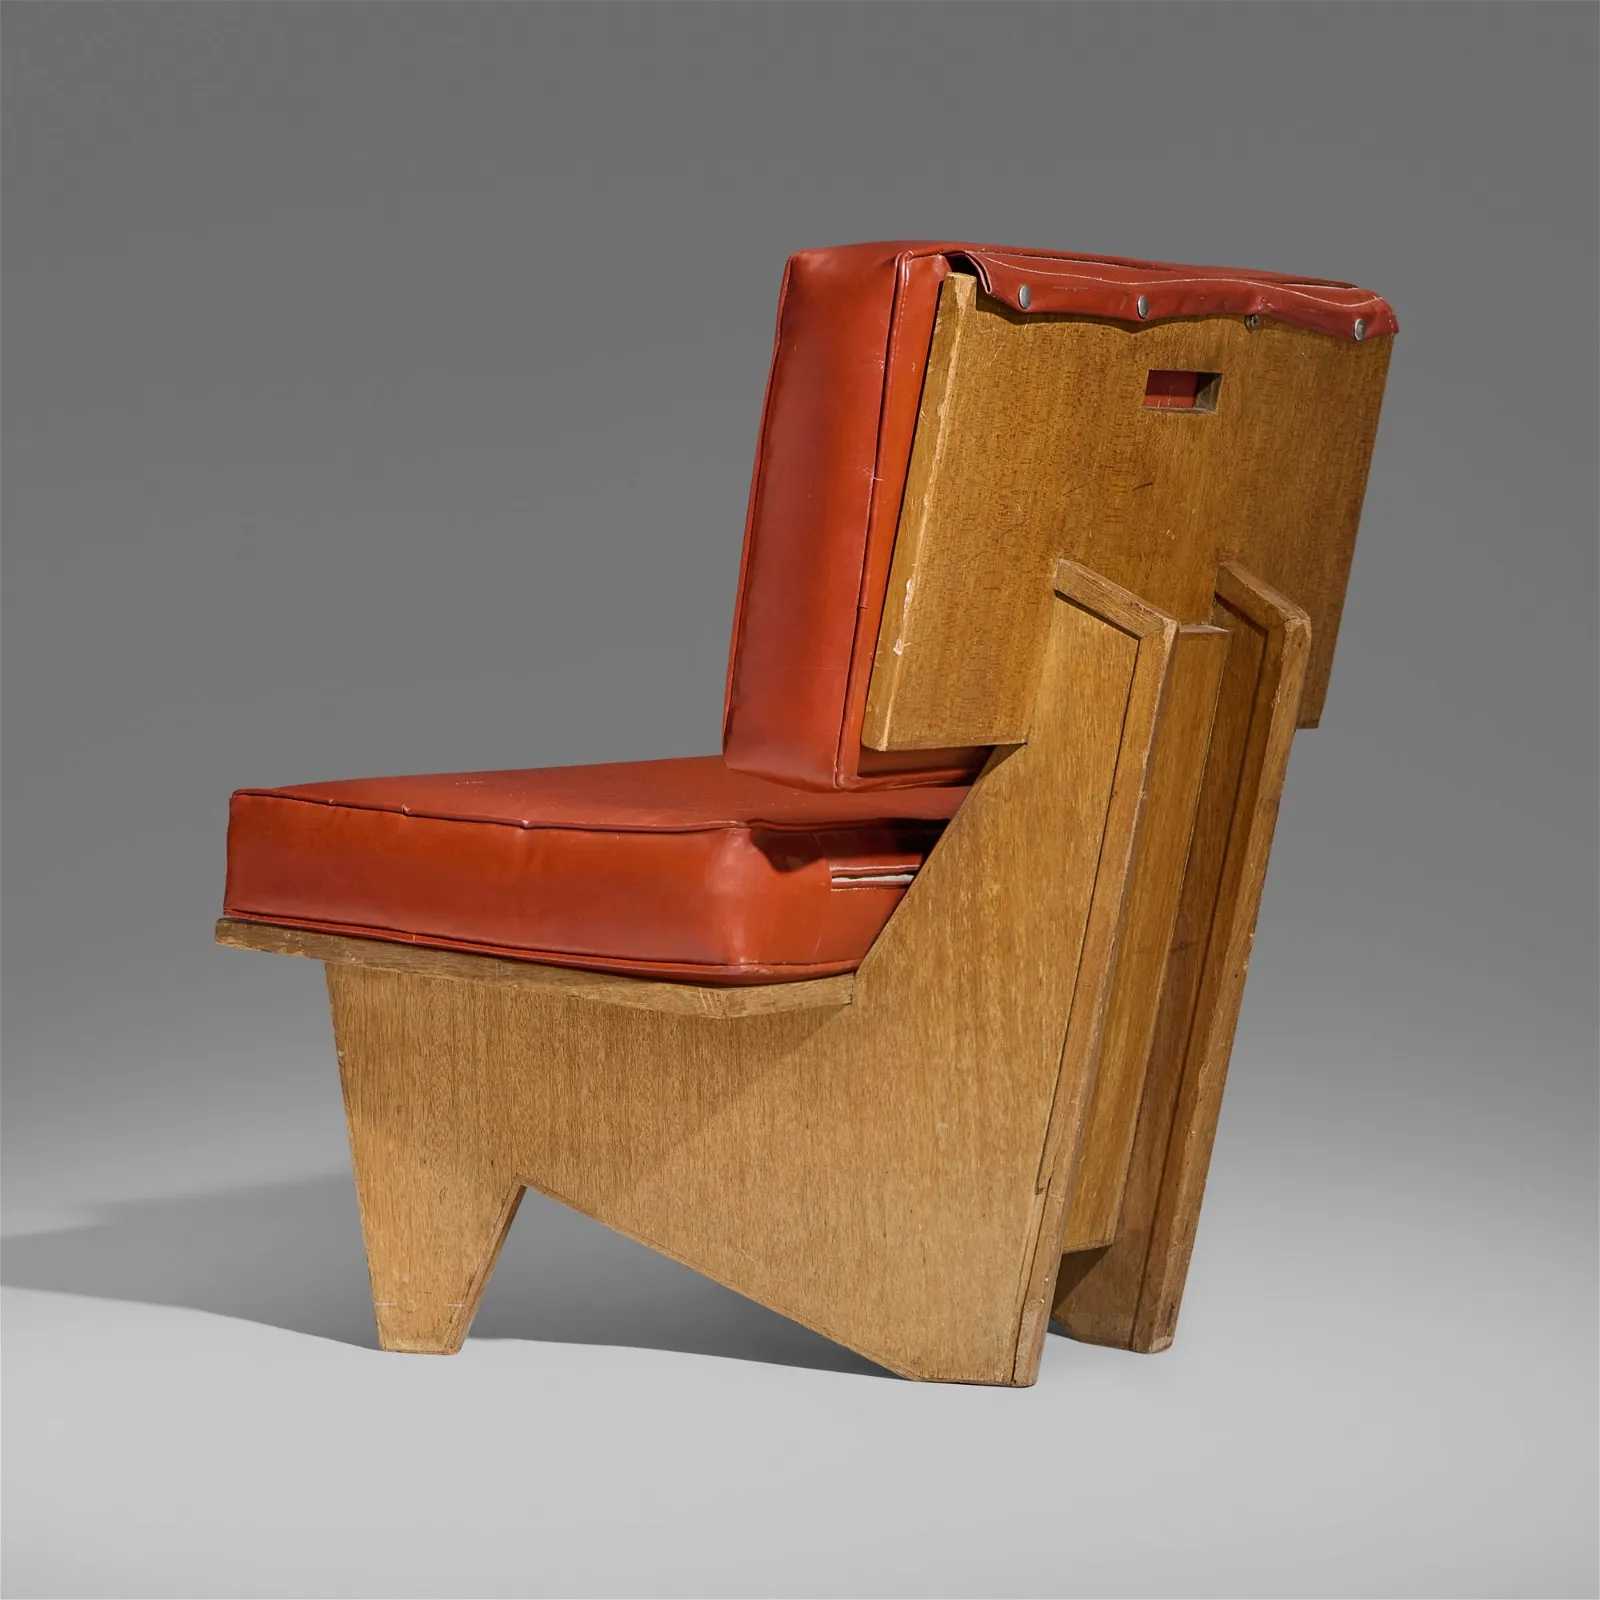 Frank Lloyd Wright chair from the Dorothy H. Turkel House in Detroit, which sold for $40,000 ($52,400 with buyer's premium) at Toomey.